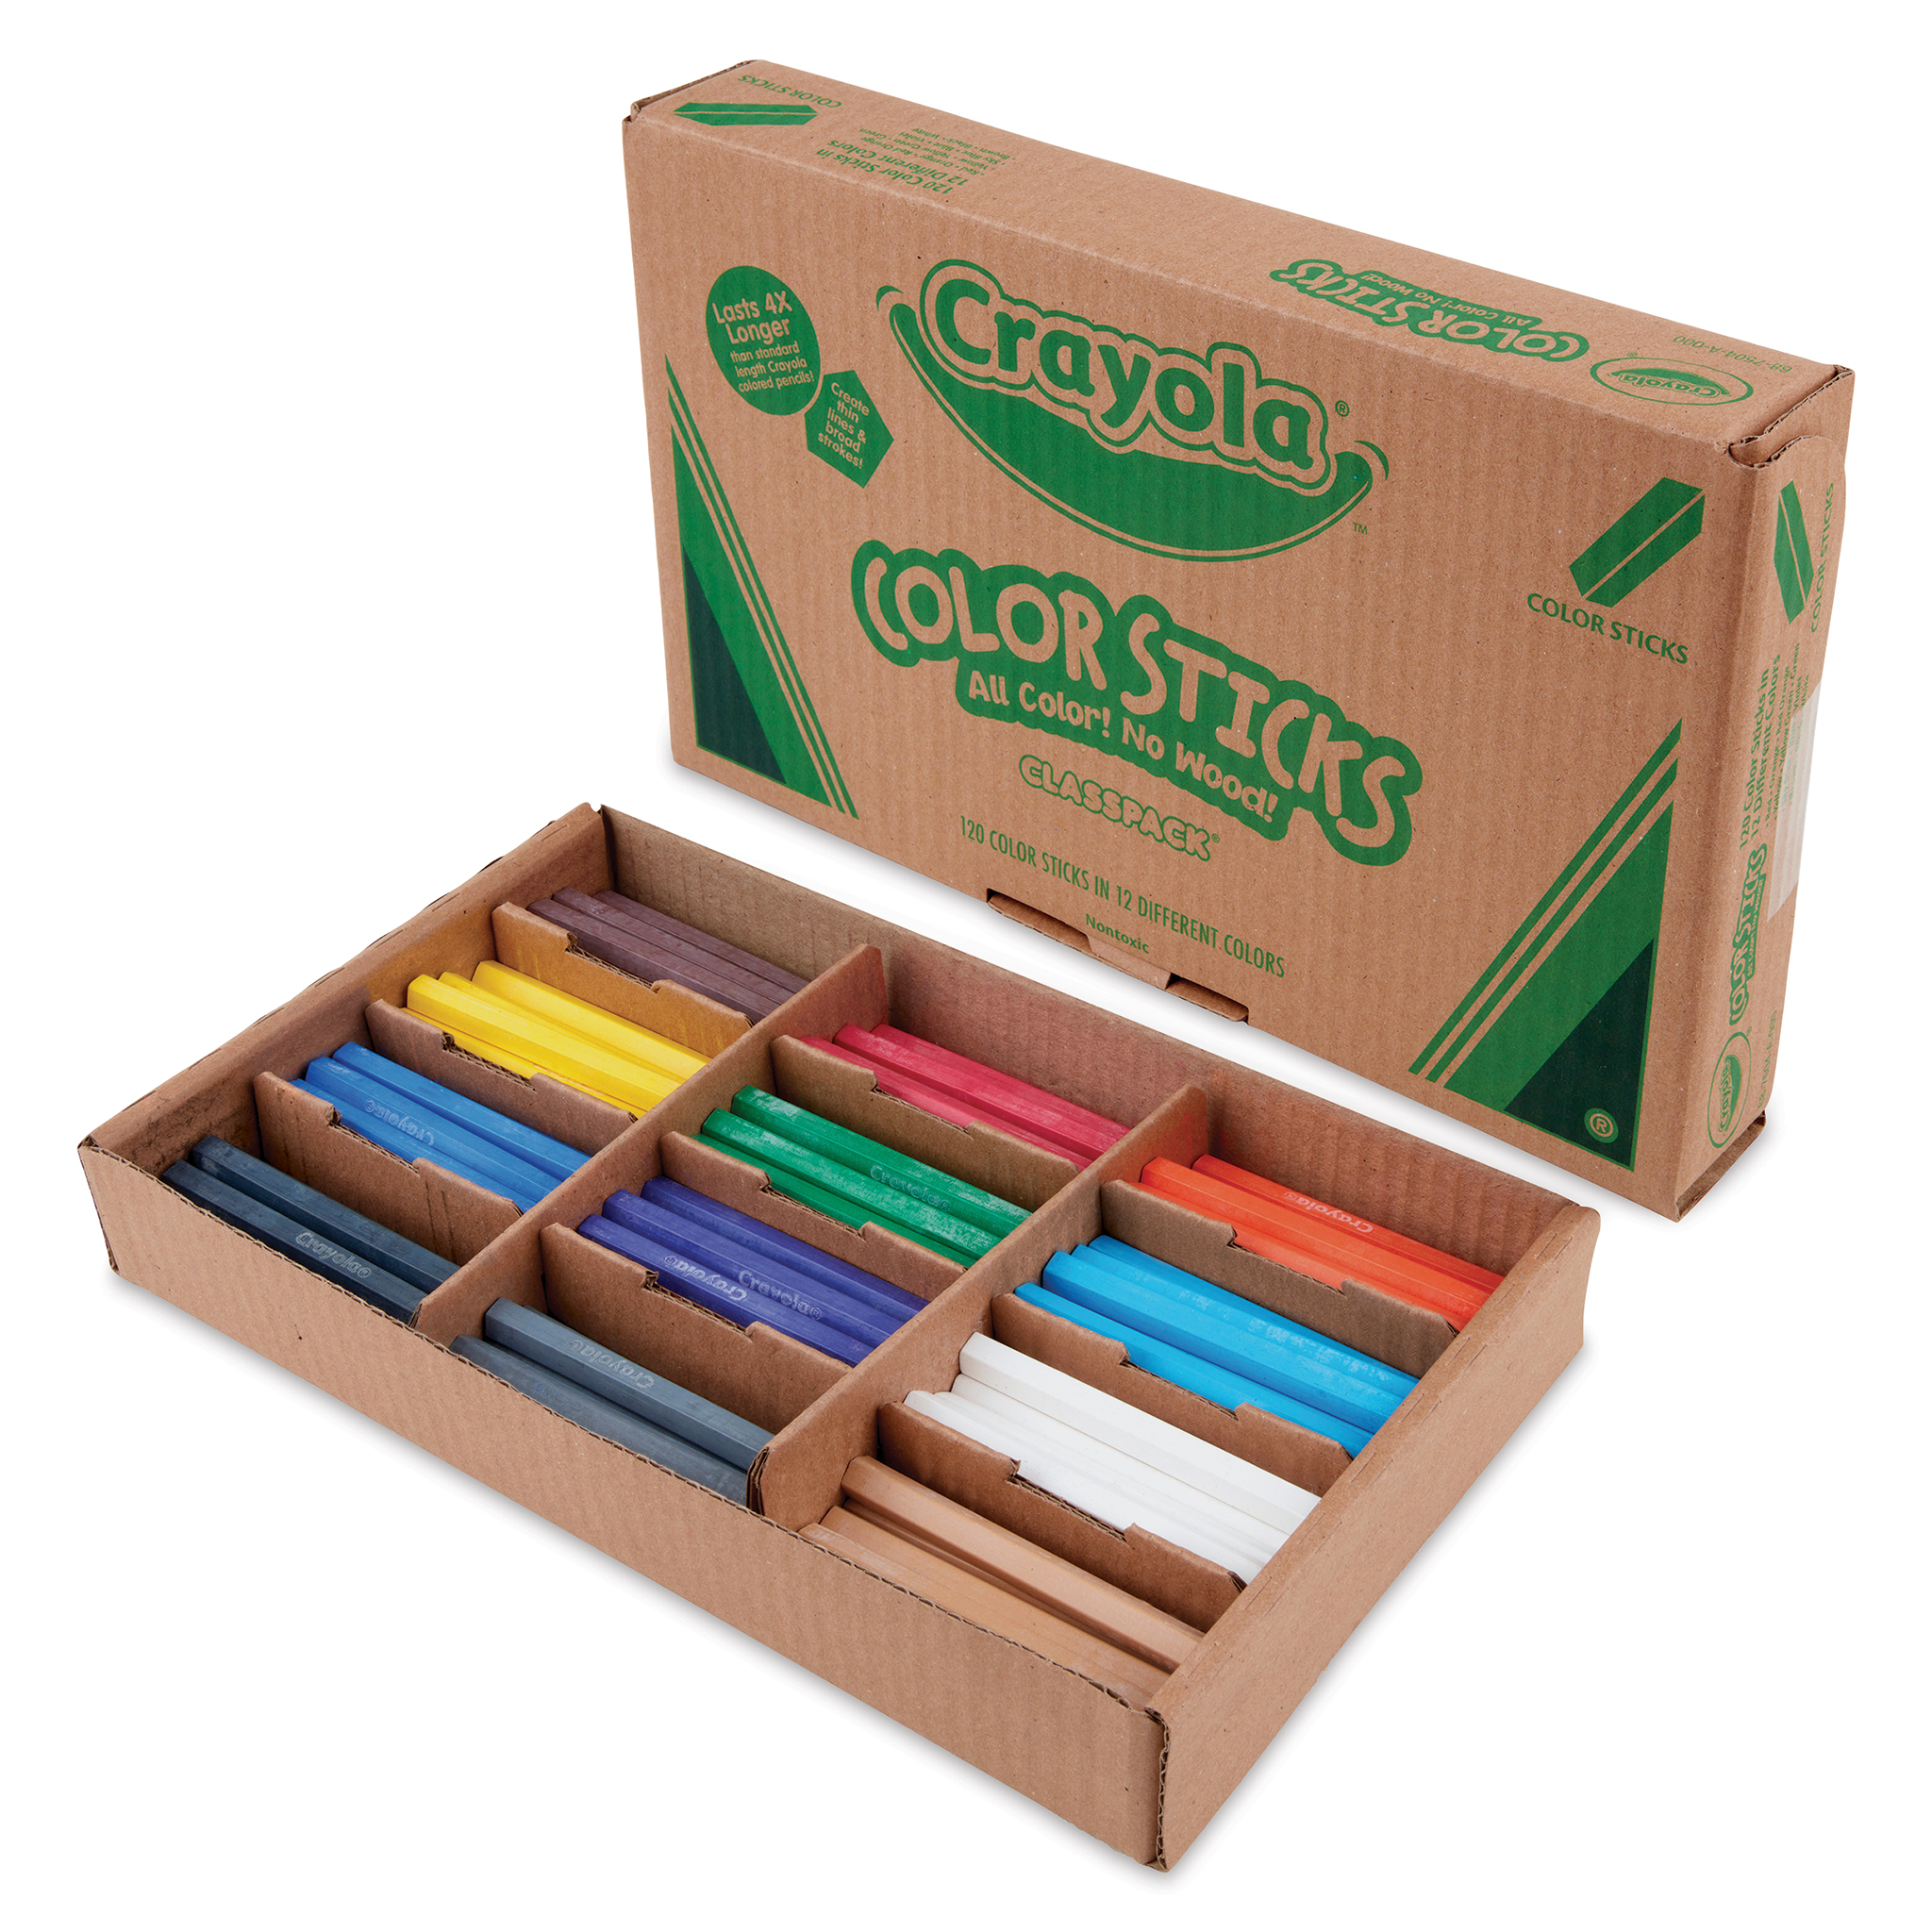 120 Crayons Color Order! Sort all the Crayola Crayons from the 120